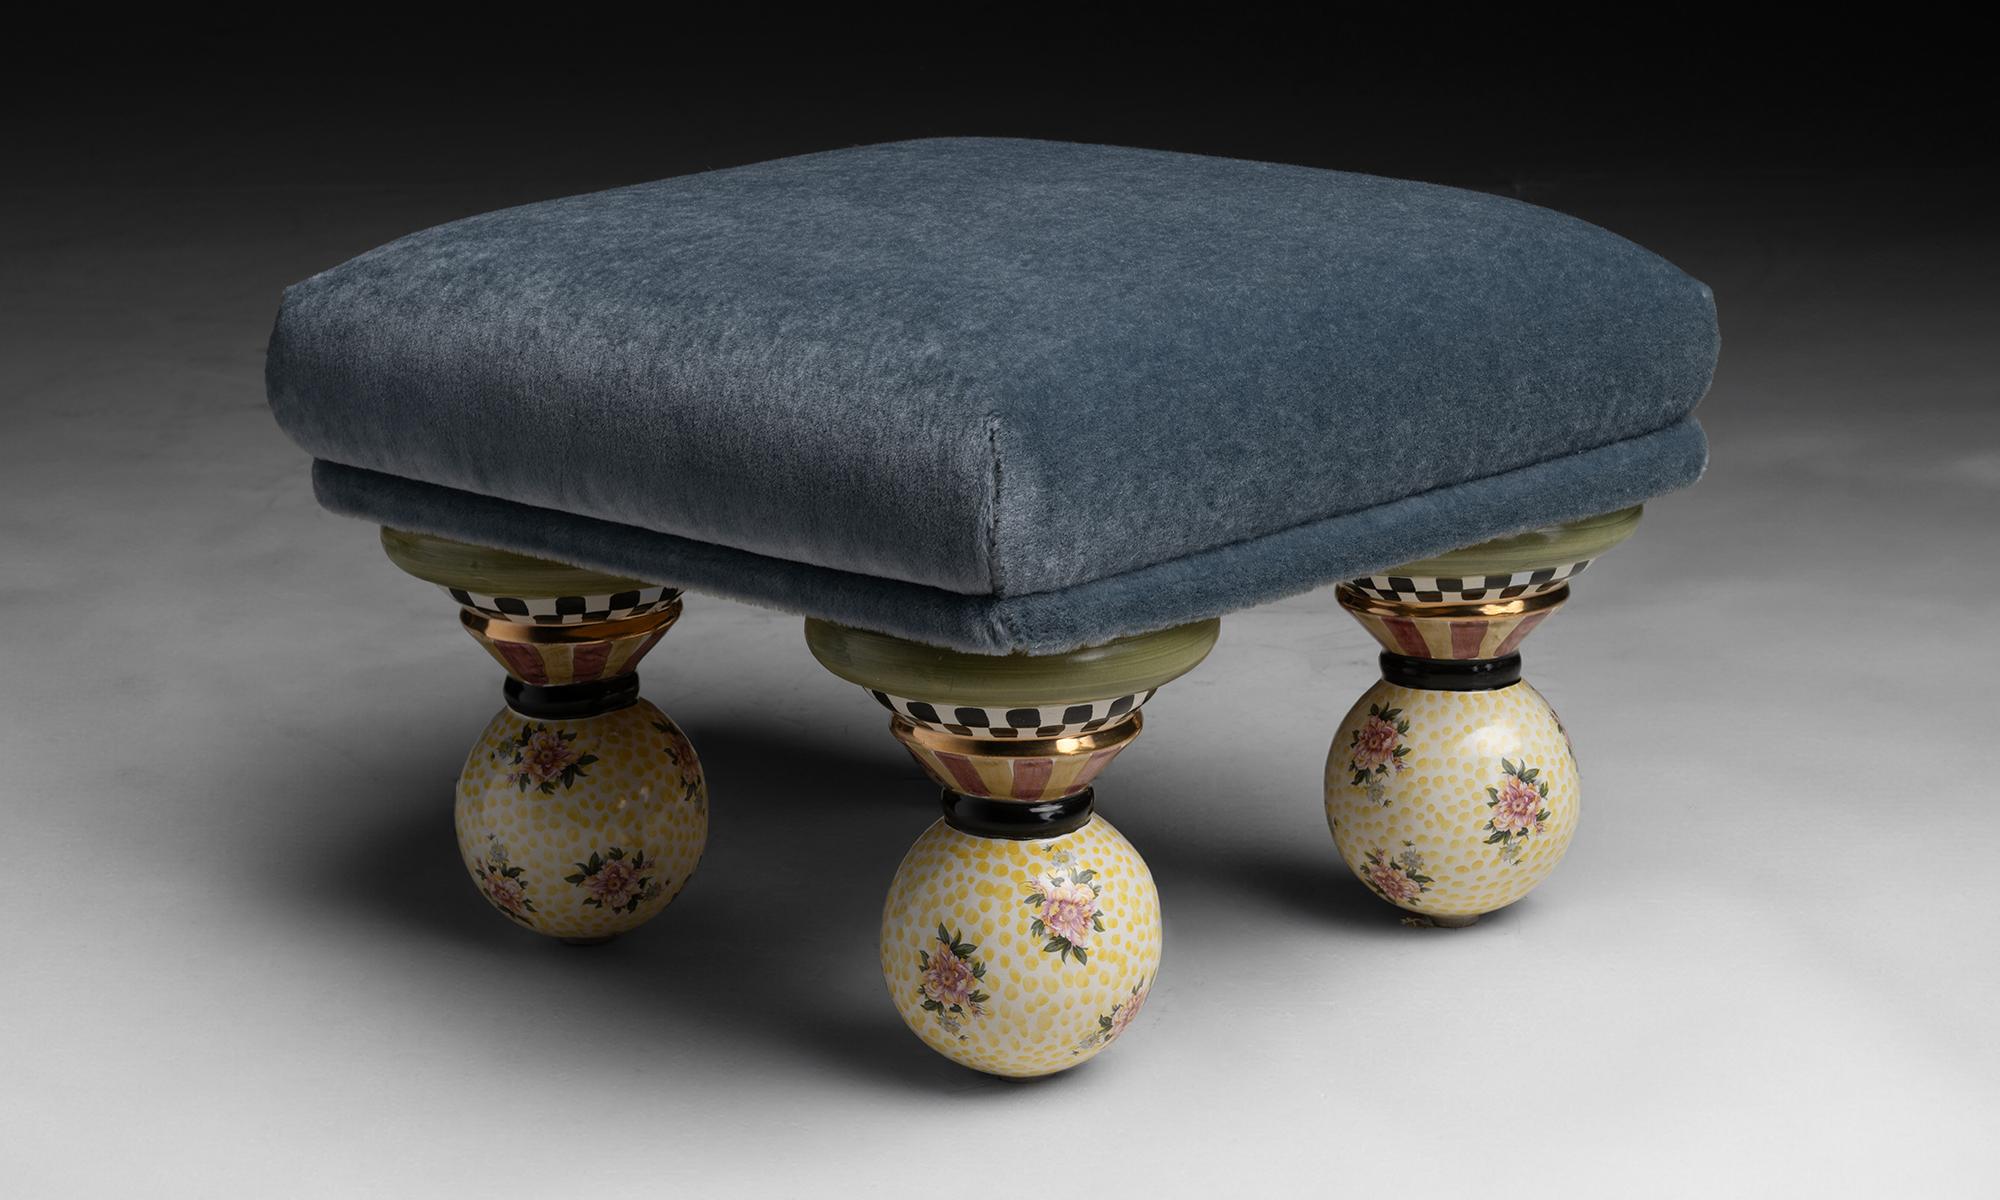 Mohair Ottoman

Made in New York

Newly upholstered Ottoman, design by Mackenzie Childs. Hand painted ceramic ball feet.

19